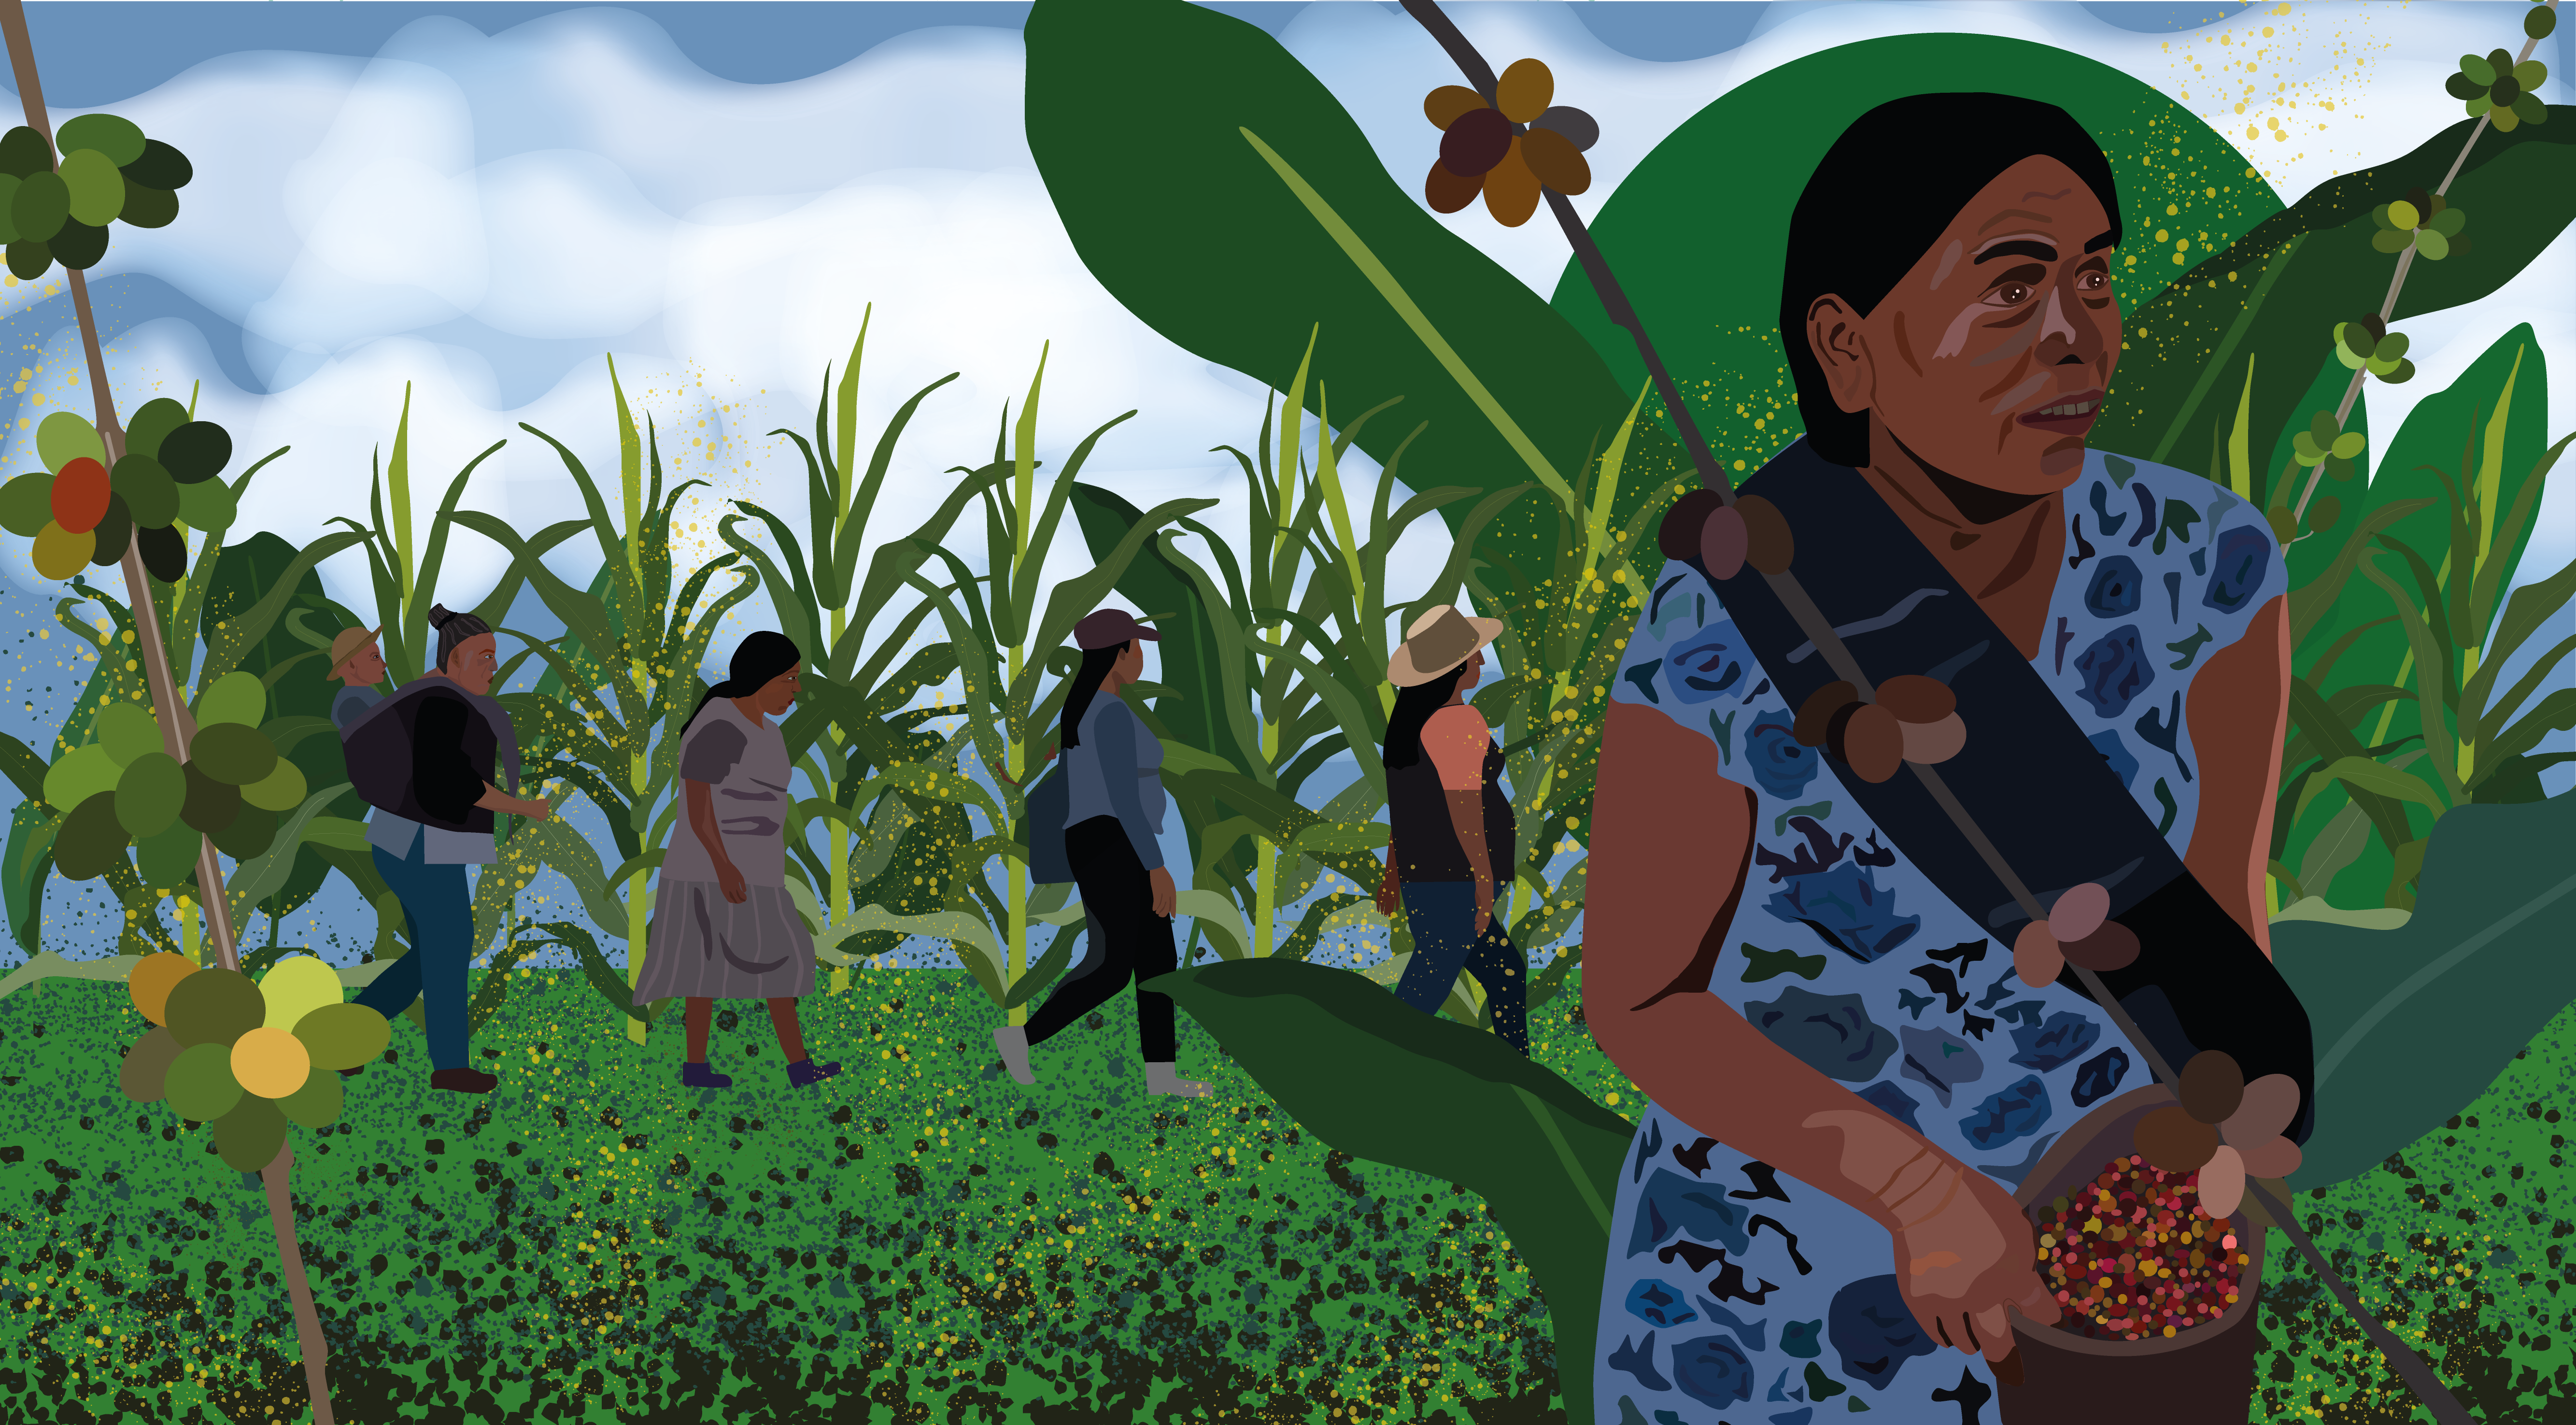 The illustration shows a lush green field of coffee plantation with a person in the foreground and four people in the background, picking coffee.